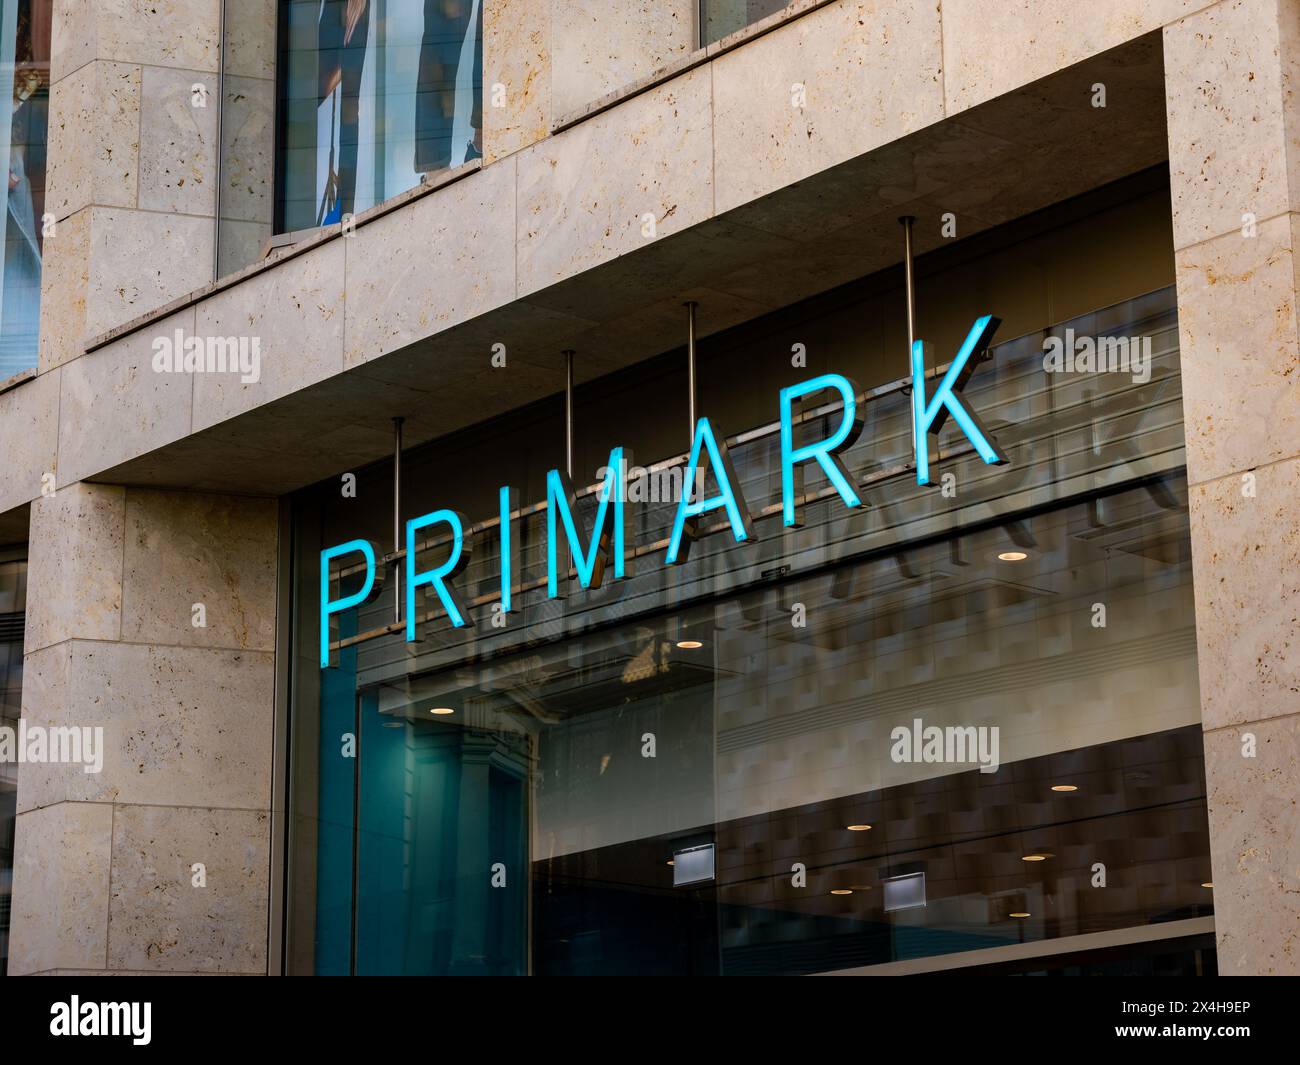 Primark logo sign of the discount fashion chain. Illuminated logotype over a building entrance. Retailer for fast fashion and employer in the city. Stock Photo